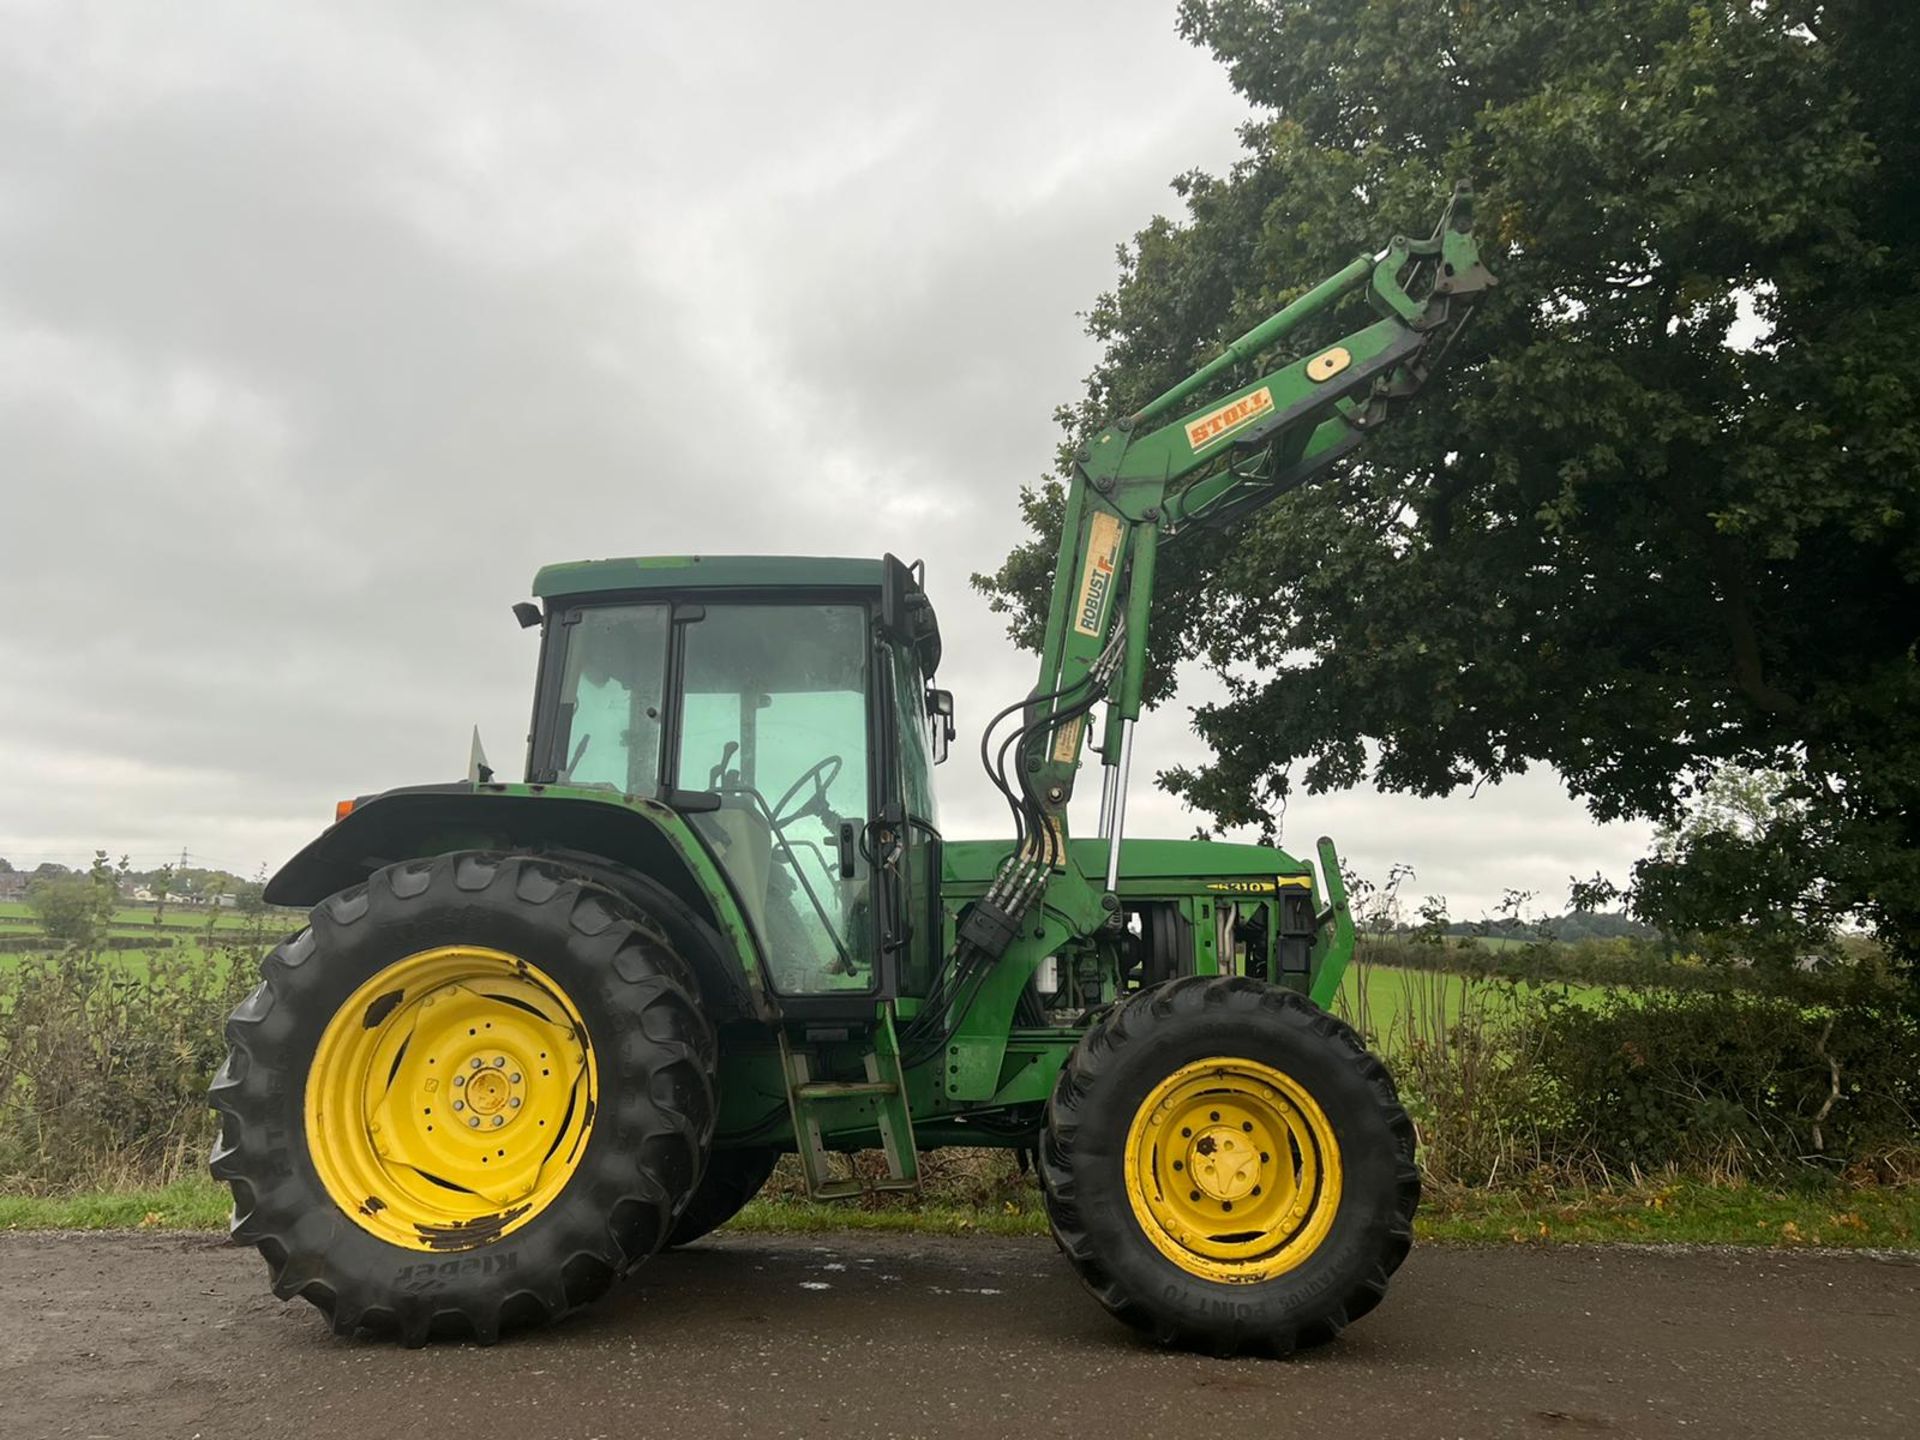 2003 JOHN DEERE 6310 99hp 4WD TRACTOR WITH STROLL FRONT LOADER, RUNS DRIVES AND WORKS *PLUS VAT* - Image 2 of 18